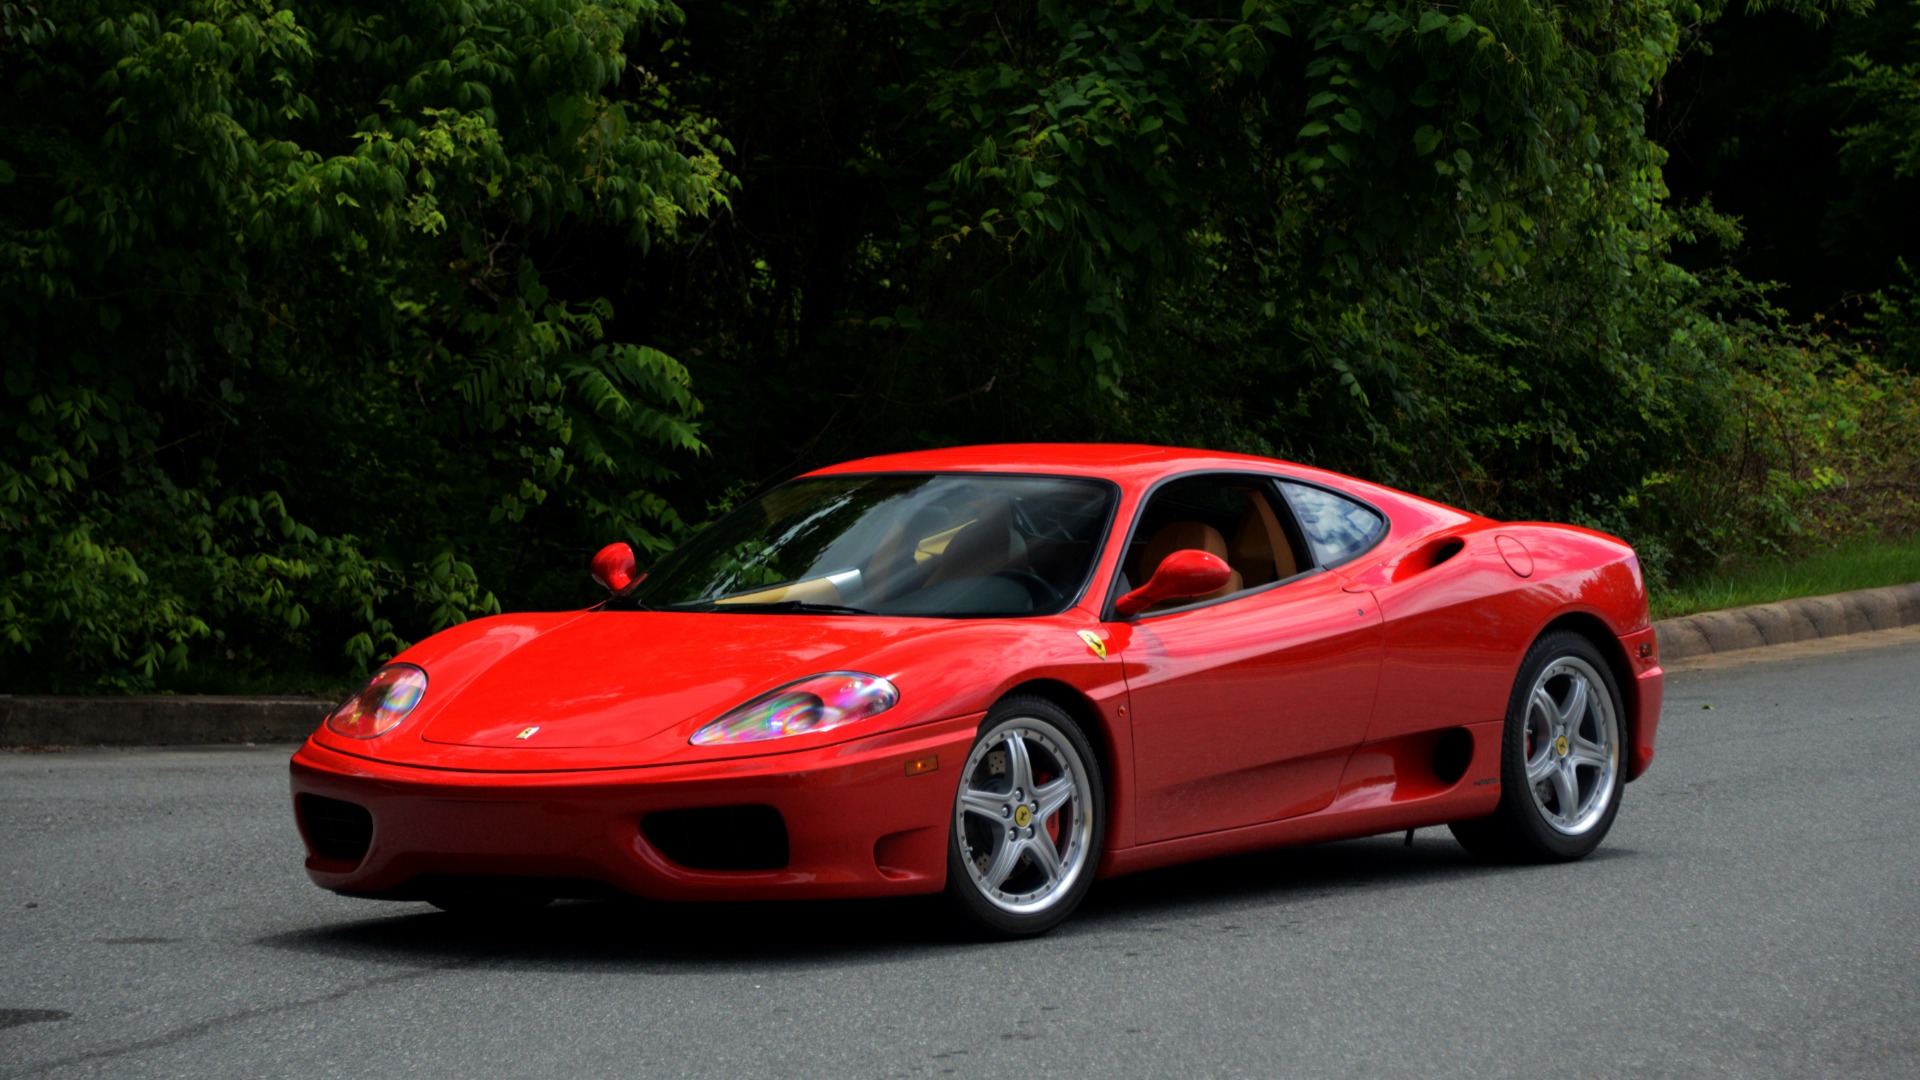 Used 2004 Ferrari 360 MODENA COUPE / GATED 6-SPD MANUAL / SUNROOF / LOW MILES for sale Sold at Formula Imports in Charlotte NC 28227 13